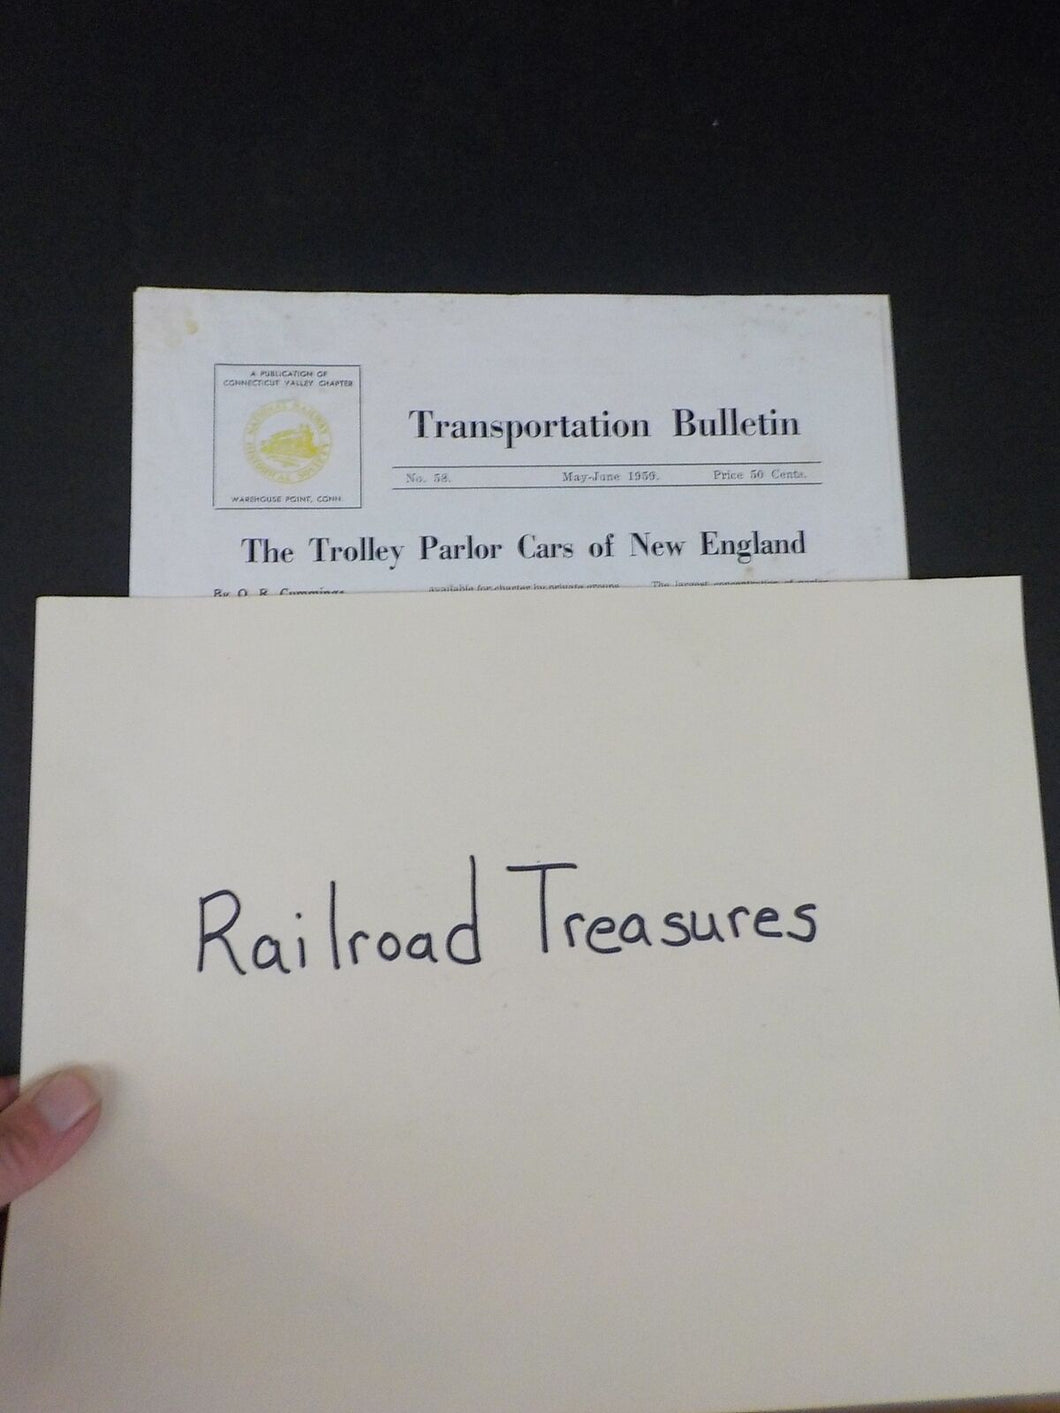 Transportation Bulletin #58 The Trolley Parlor Cars of New England